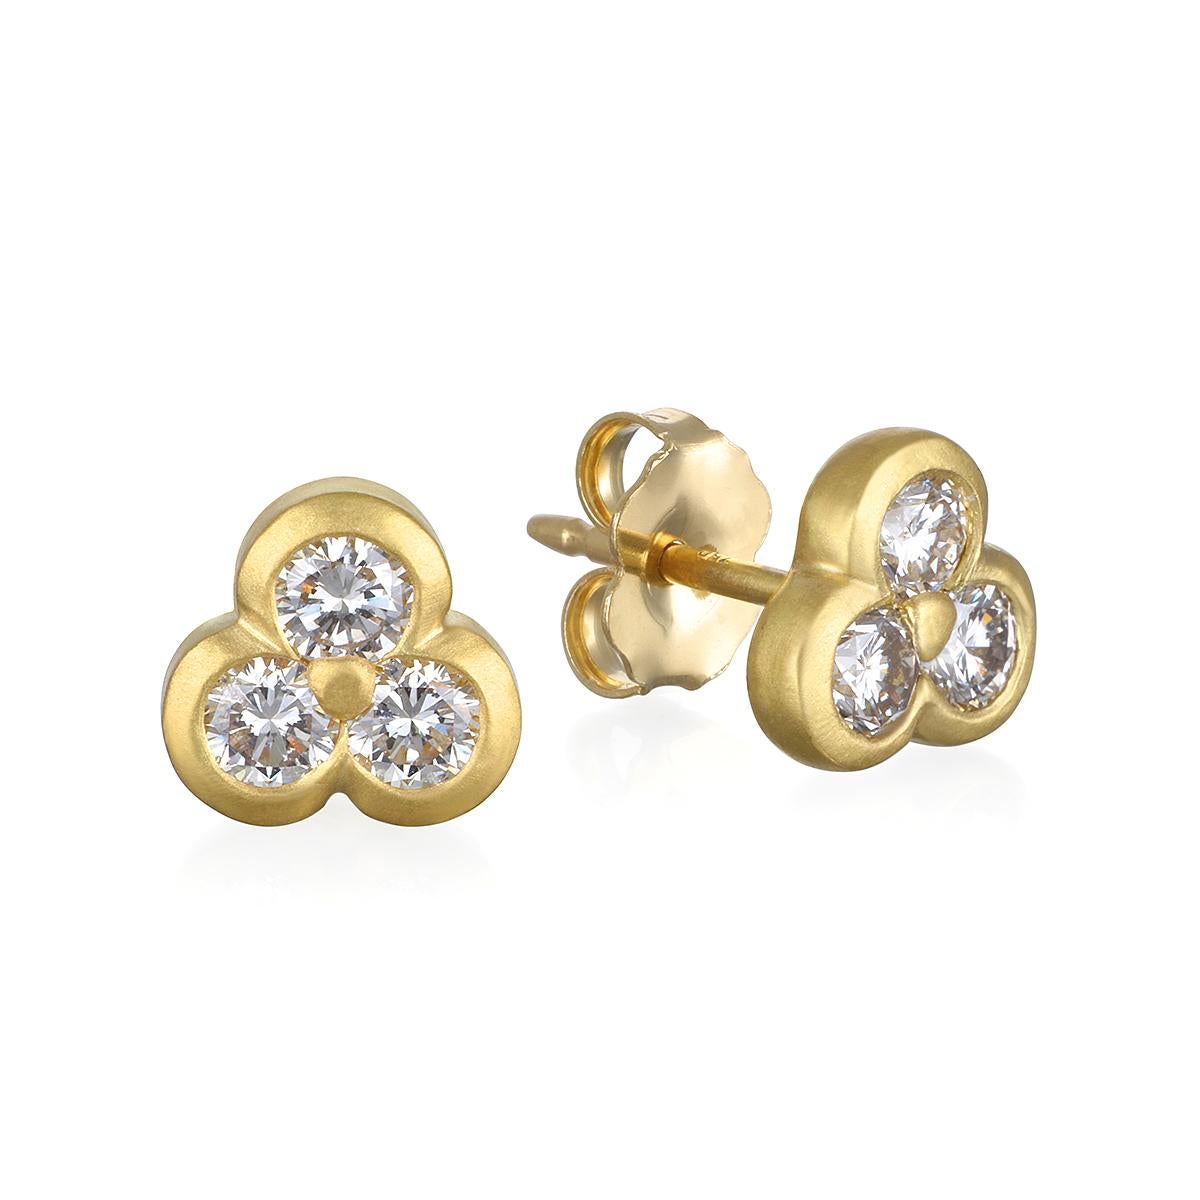 Triple Diamond earrings in 18k gold with a matte finish by Faye Kim. Classic and timeless!

Diamonds = .75 cts twt
Diameter .3